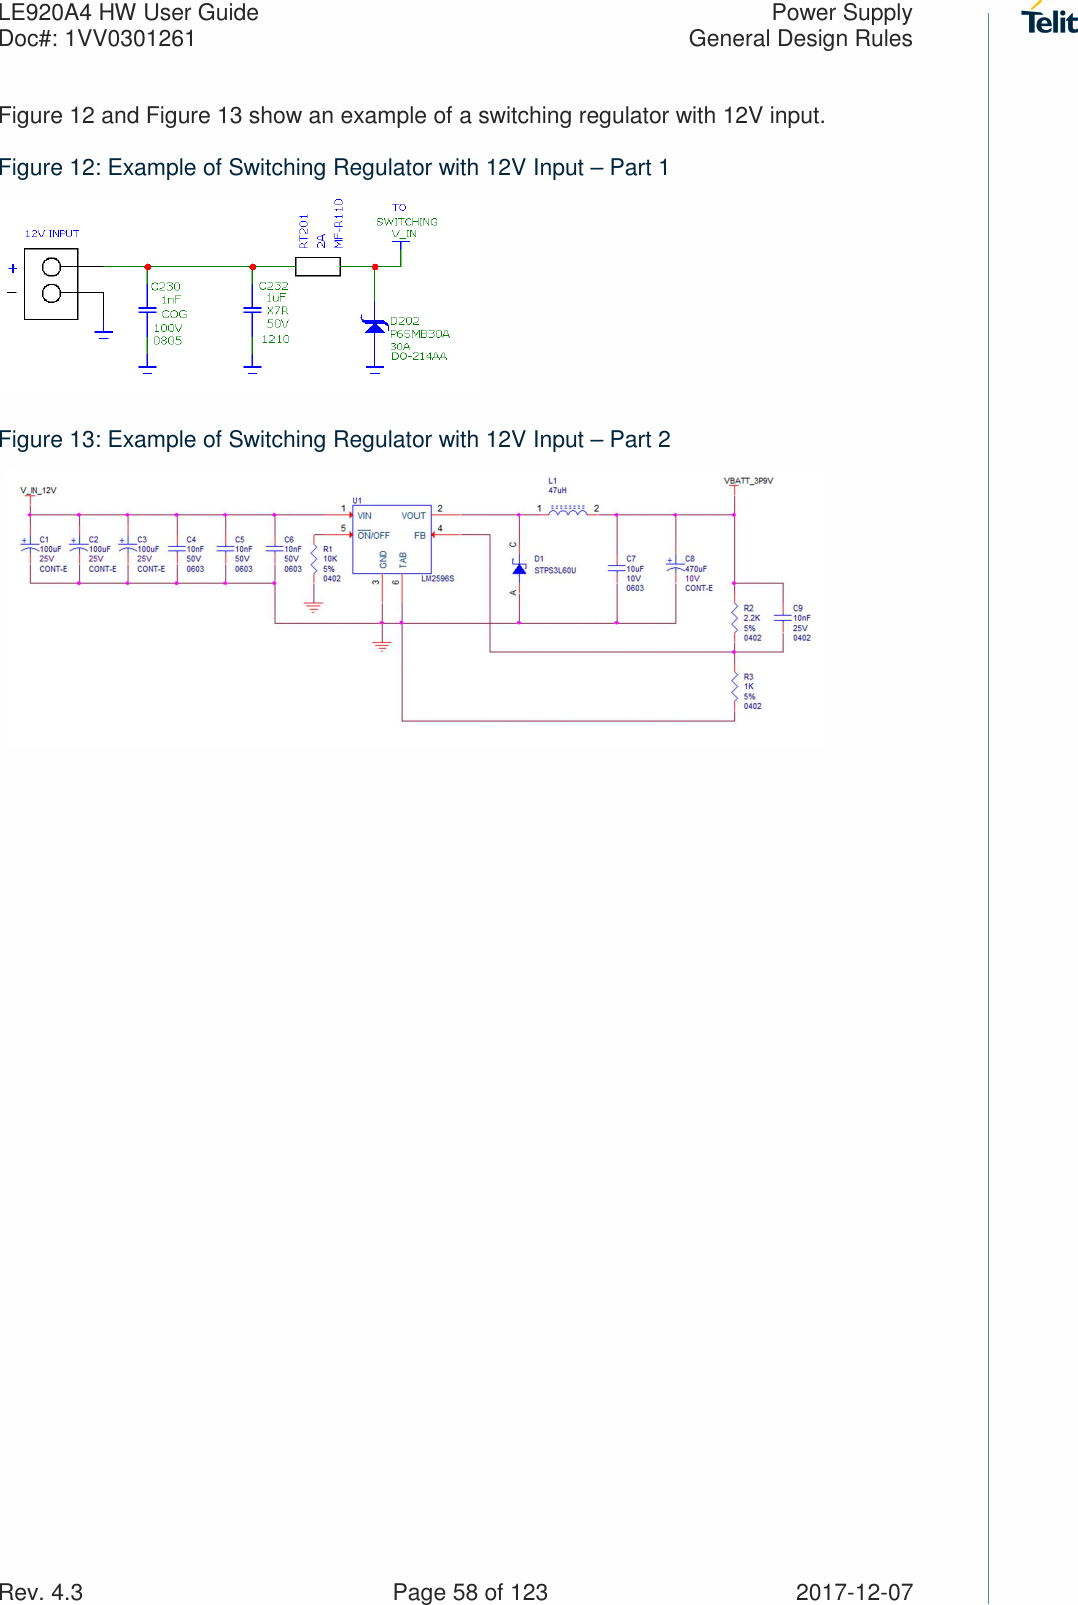 LE920A4 HW User Guide  Power Supply Doc#: 1VV0301261  General Design Rules Rev. 4.3    Page 58 of 123  2017-12-07 Figure 12 and Figure 13 show an example of a switching regulator with 12V input. Figure 12: Example of Switching Regulator with 12V Input – Part 1  Figure 13: Example of Switching Regulator with 12V Input – Part 2       